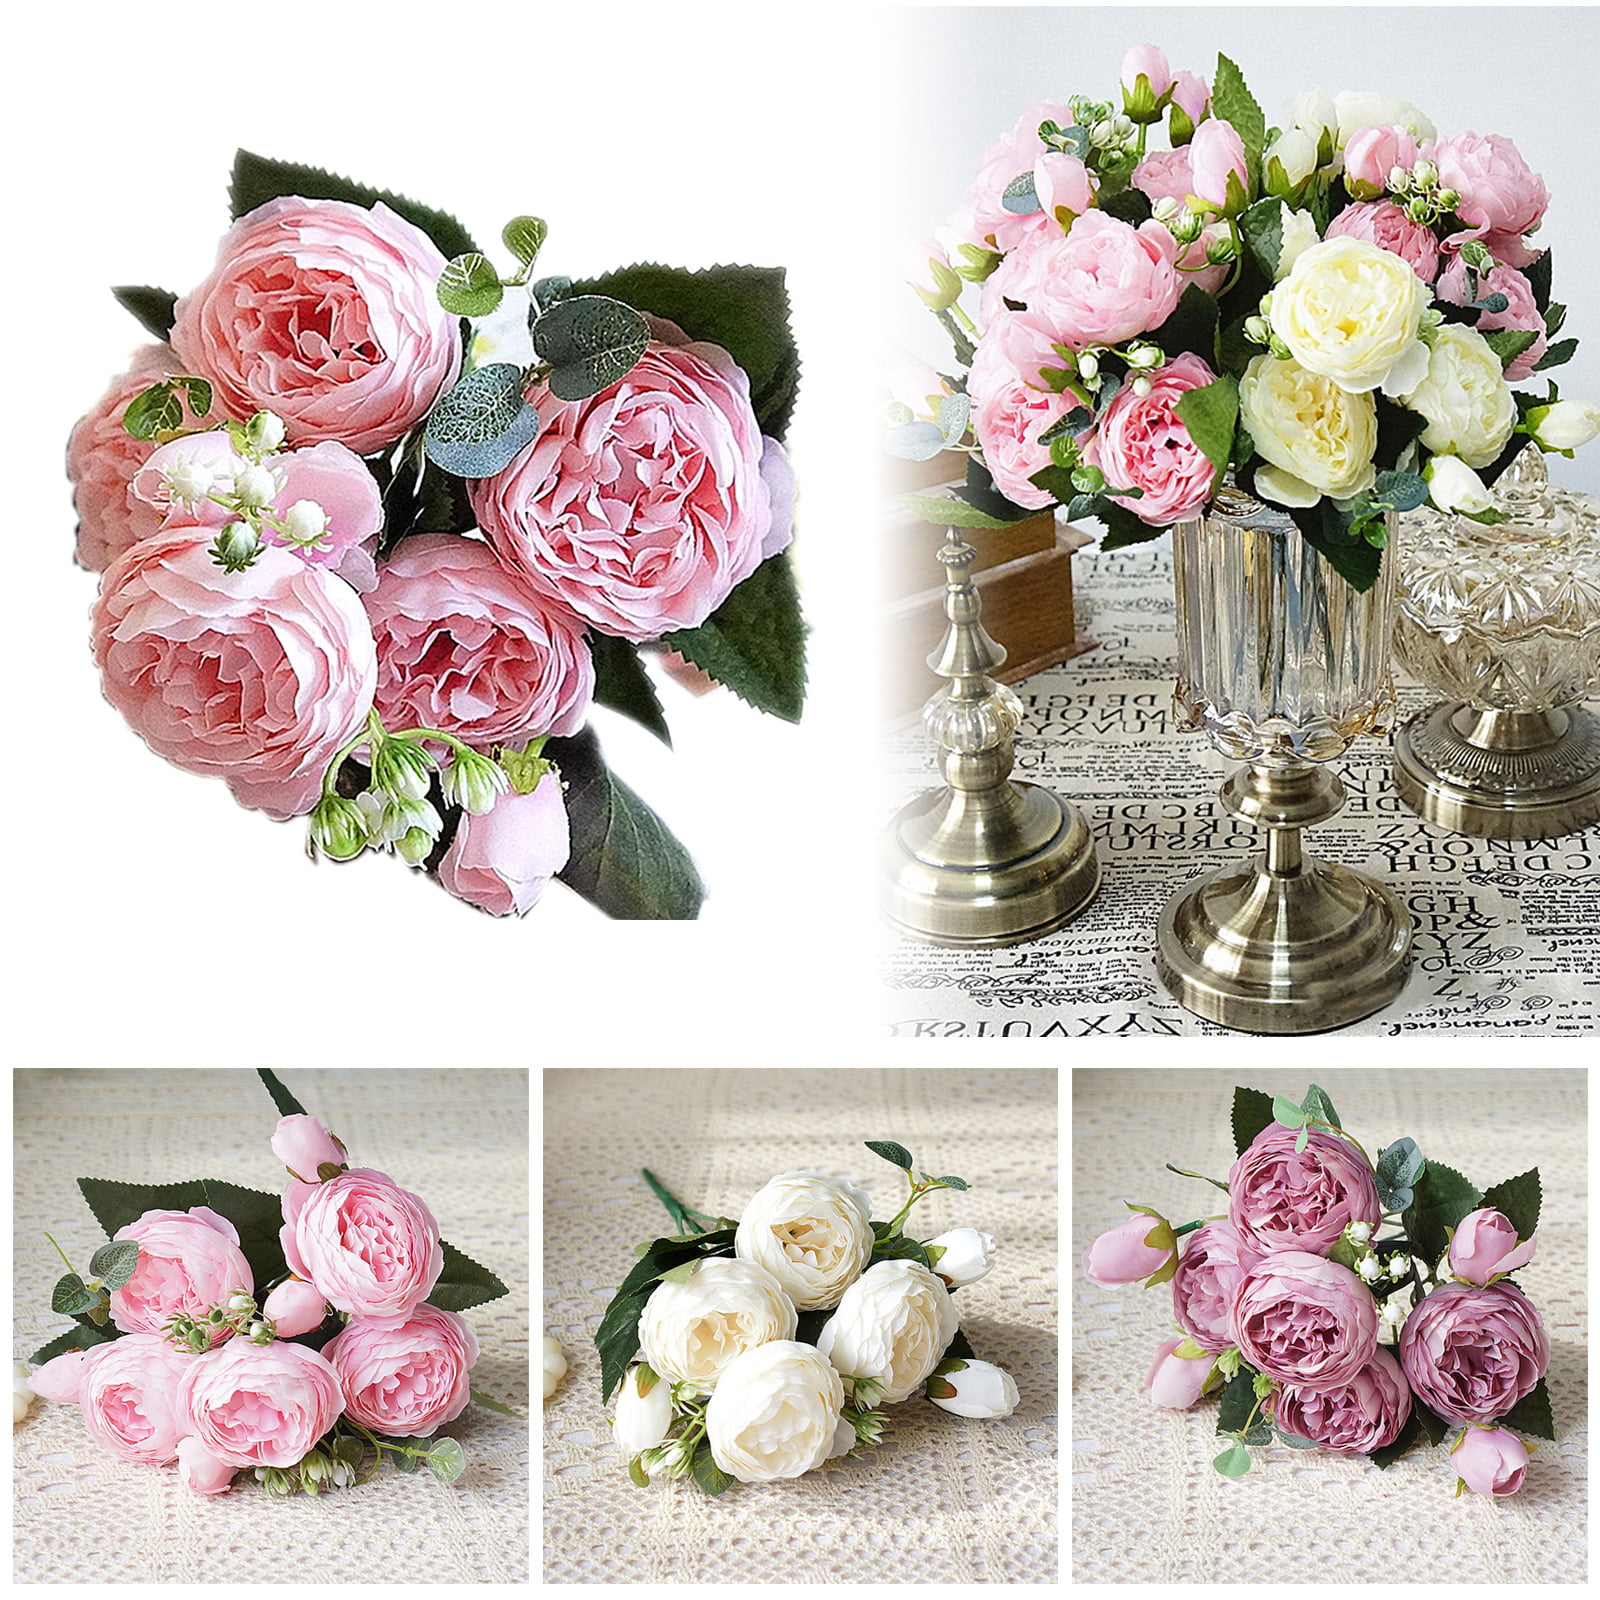 30cm Silk Peony Bunch Artificial Flowers Fake Roses Bouquet Party Decor 